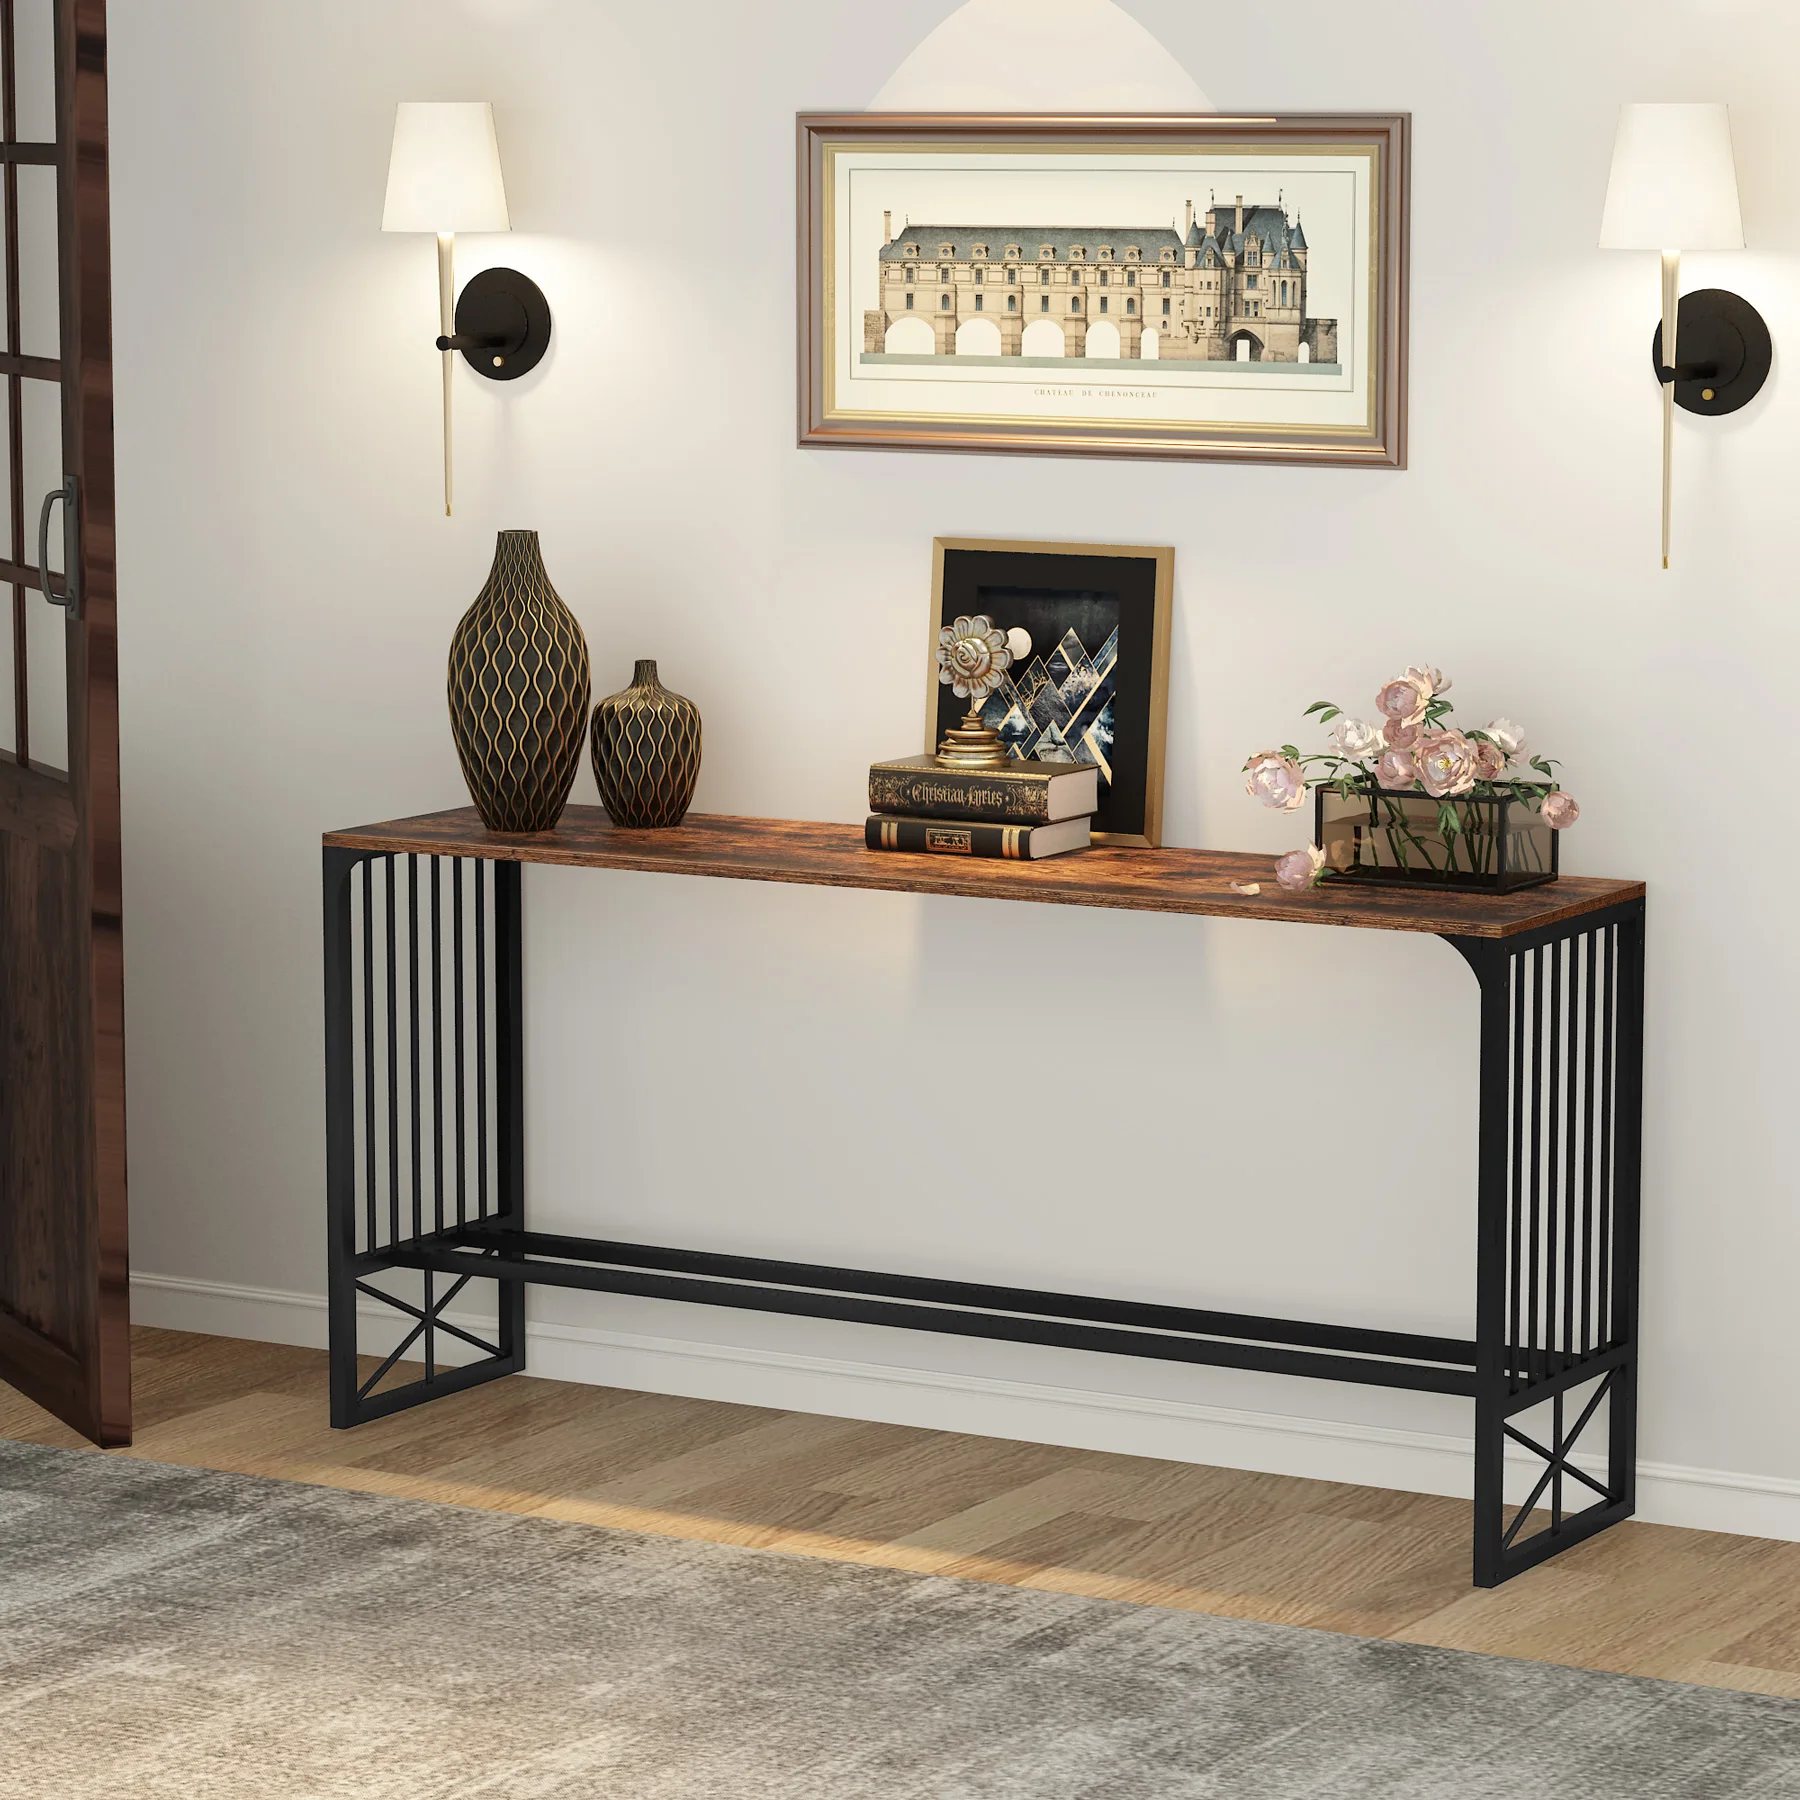 70.9 inch Industrial Sofa Wood Wall Long Narrow Console Table For Living Room Furniture